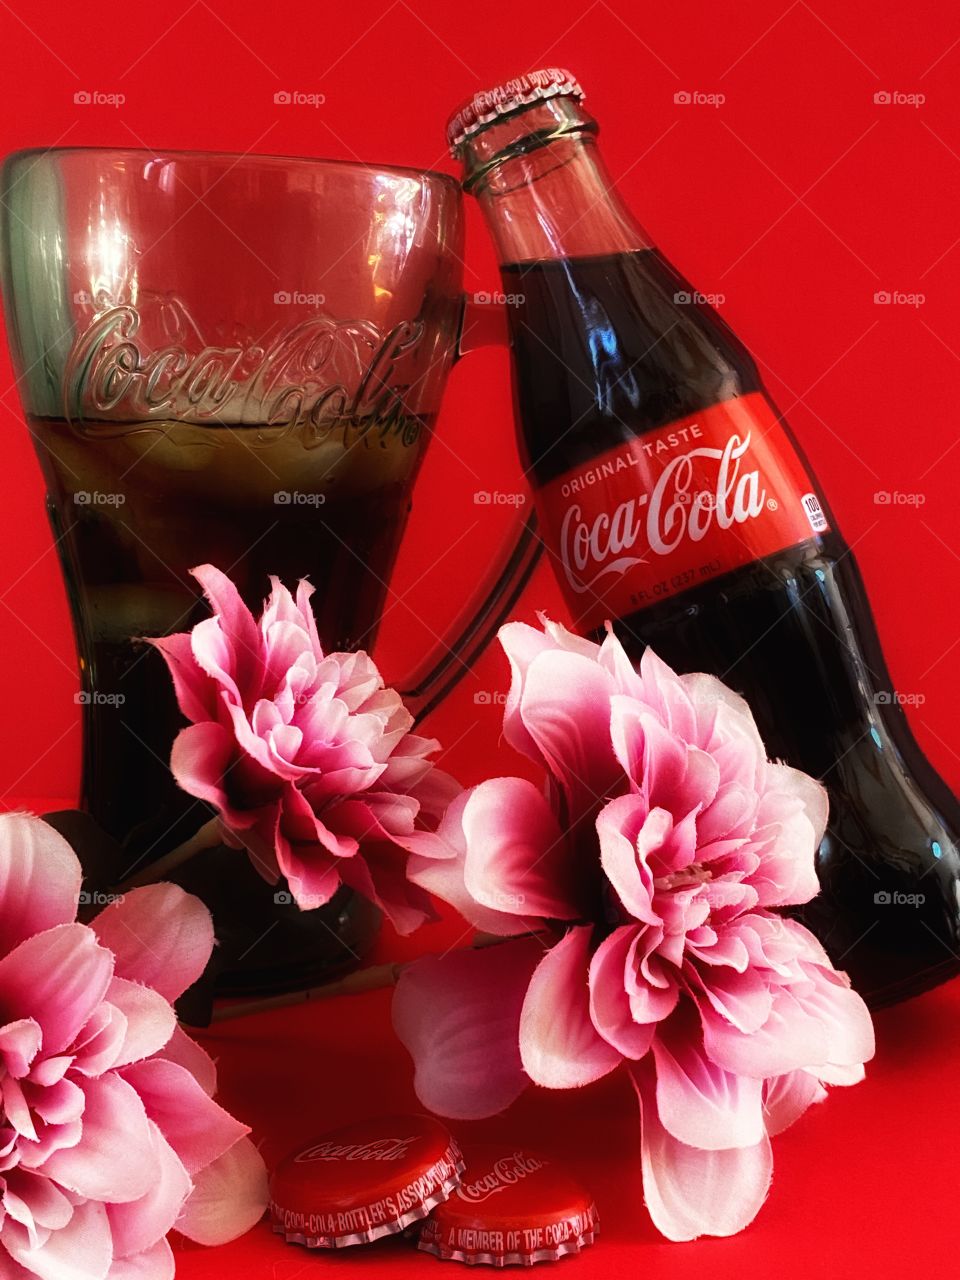 A Coca Cola bottle with a Coca Cola glass background is red and tree pink flowers in front 